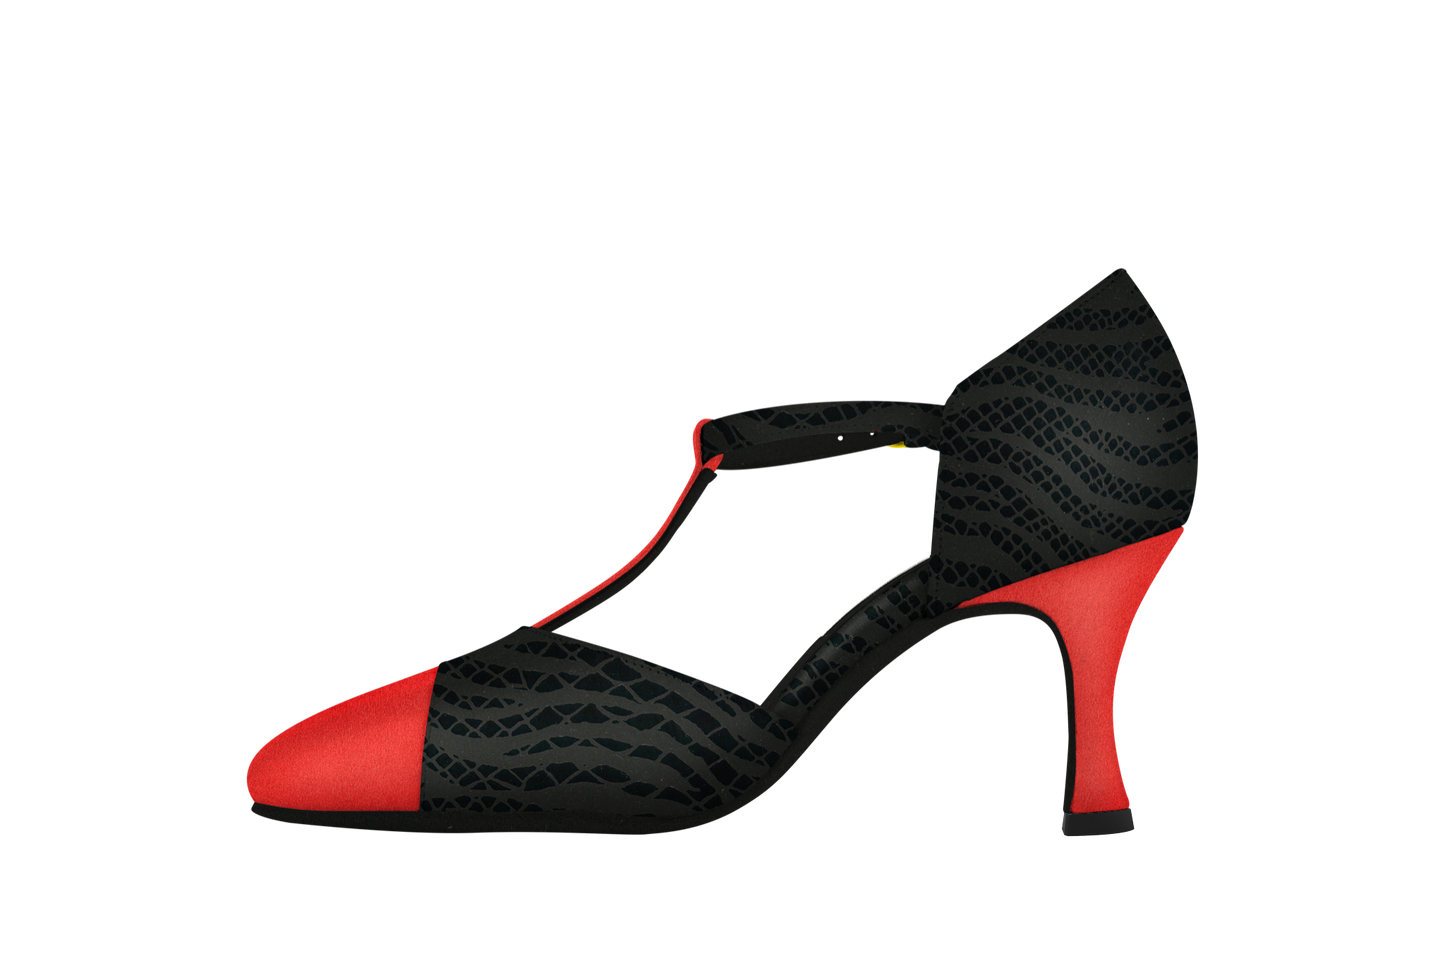 Dance Naturals 730 Marta Red Suede/Black Suede Printed Pointed Toe Ballroom Dance Shoe with T-Bar Strap